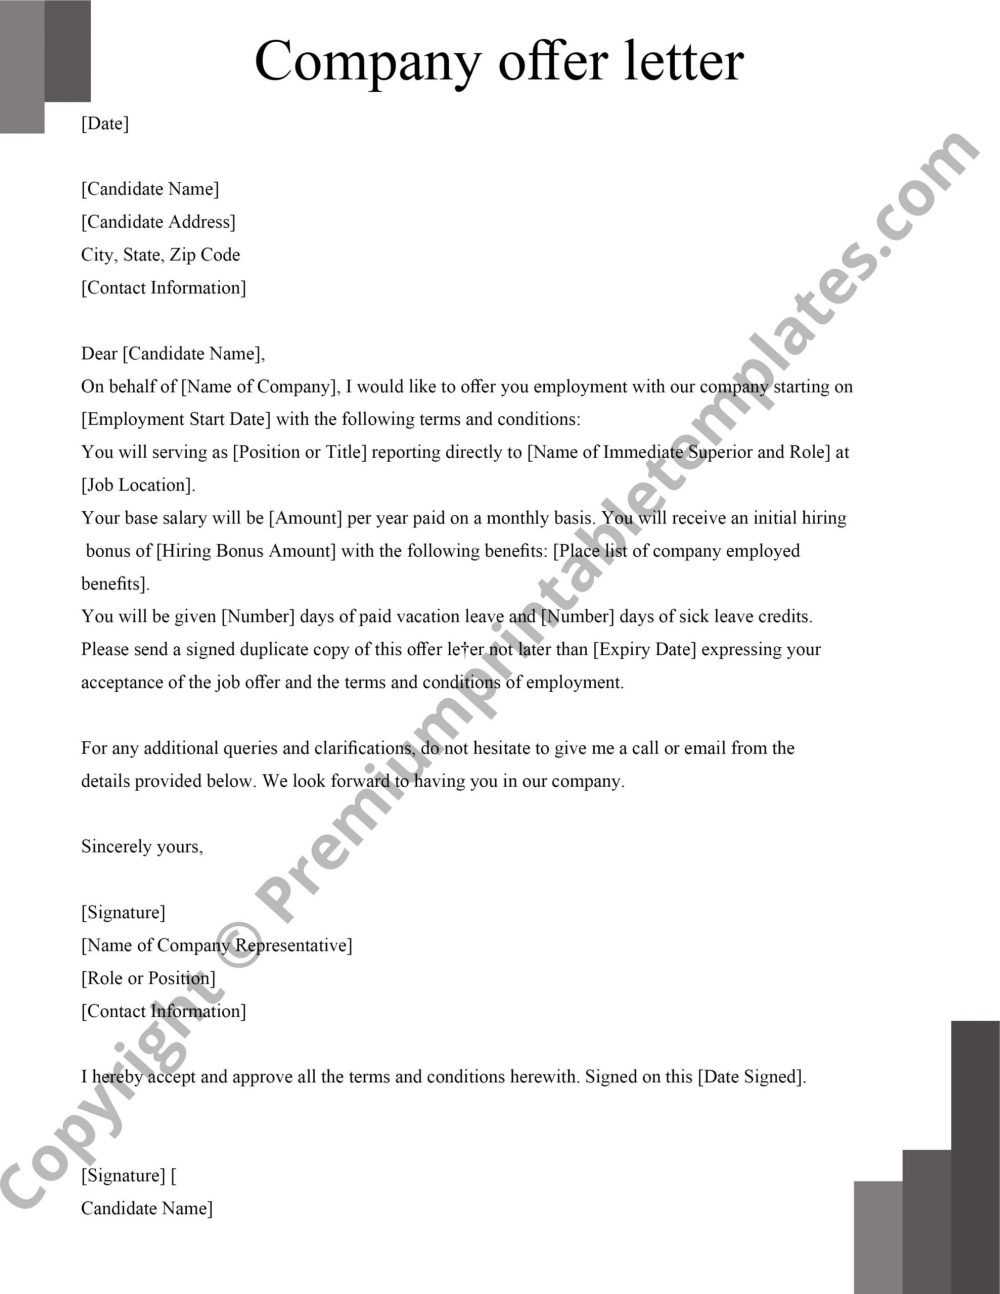 Company Offer Letter